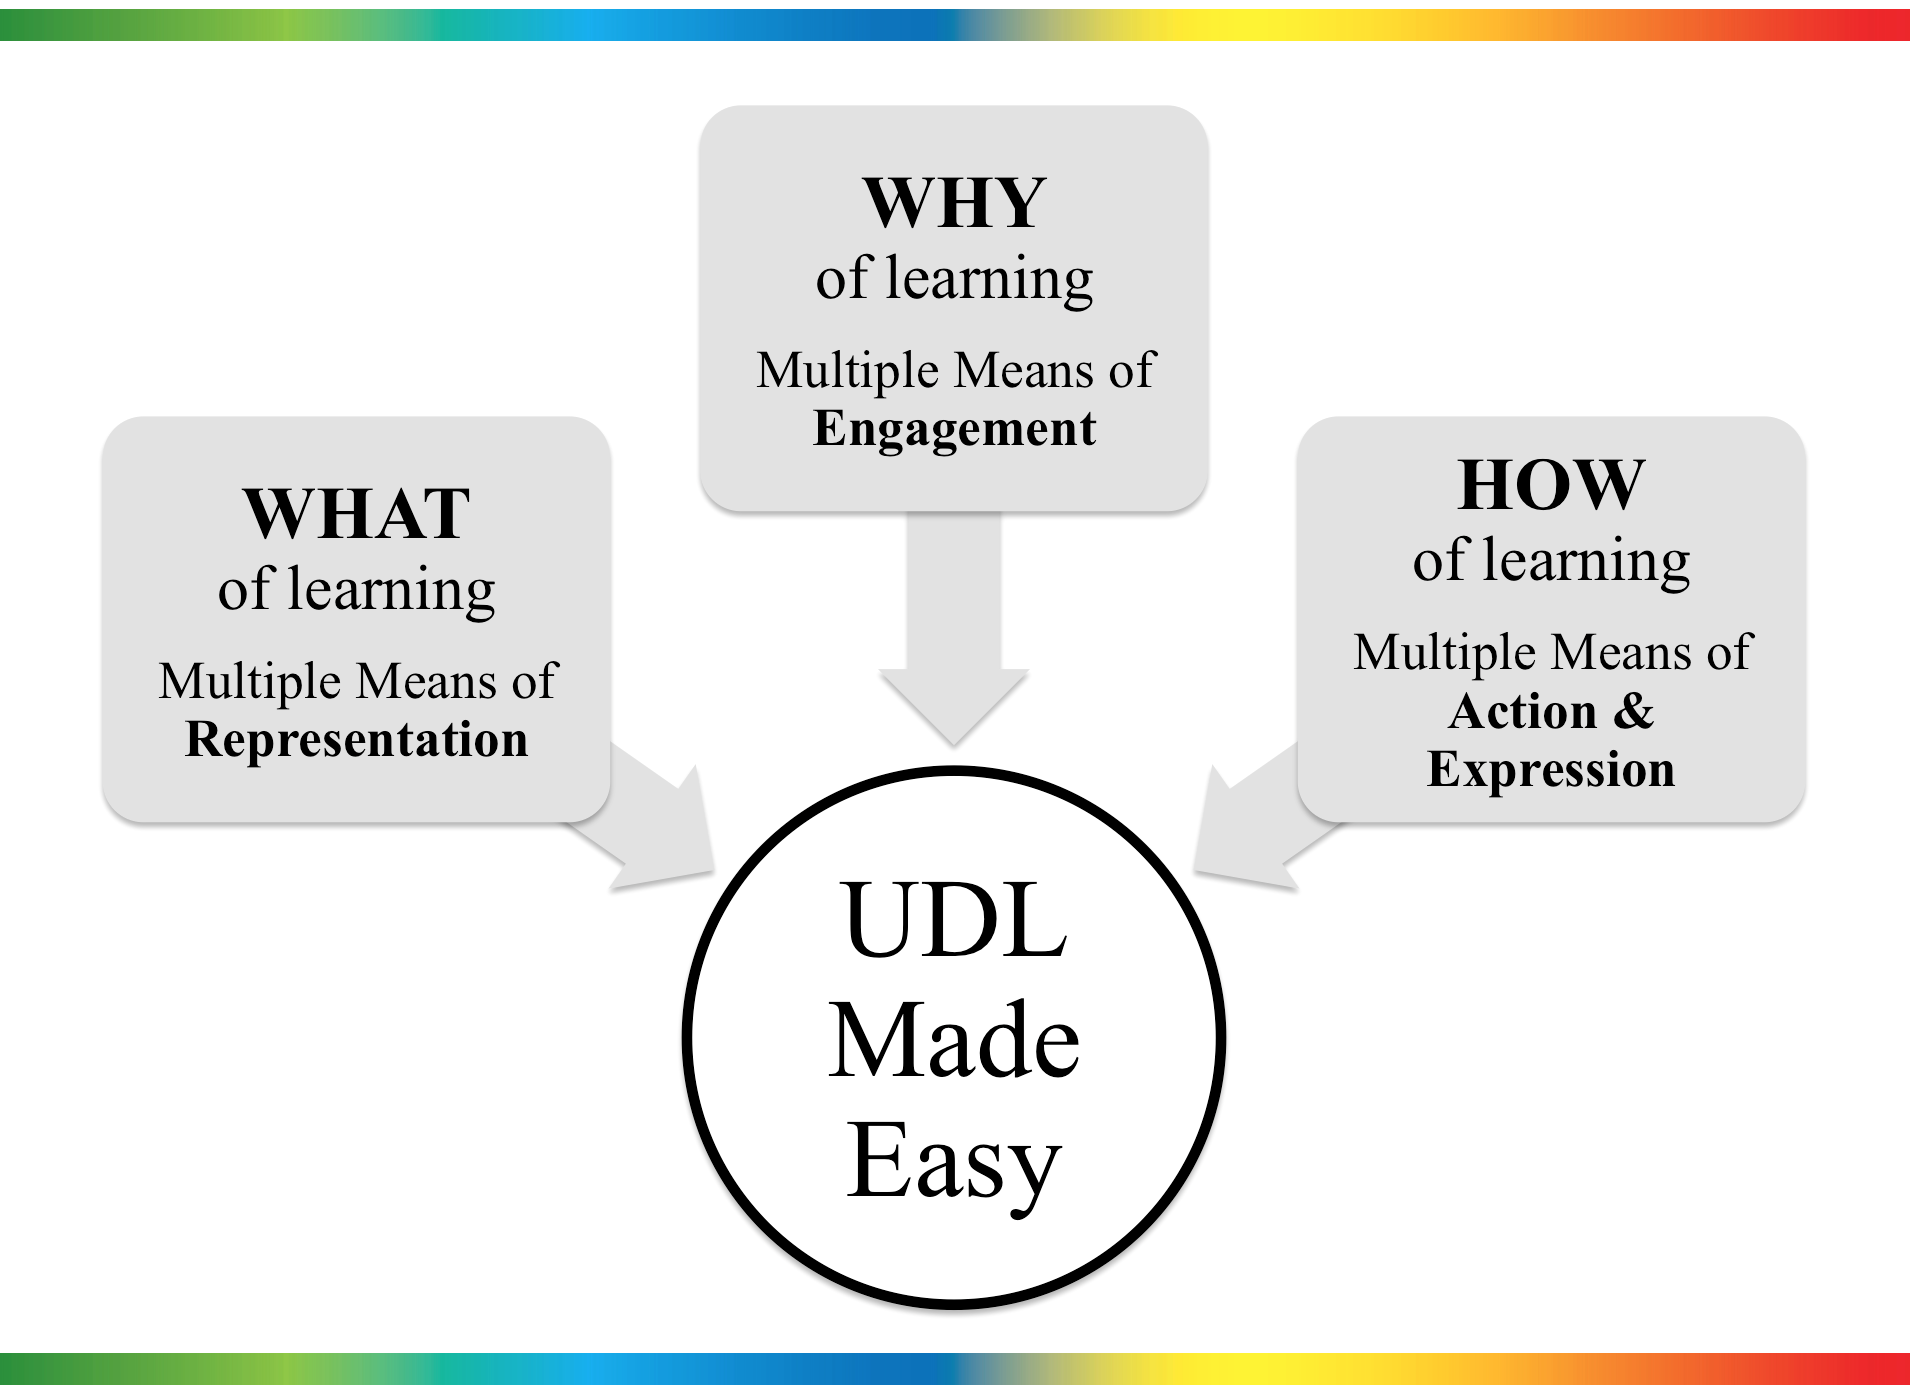 UDL made easy, what why and how of learning